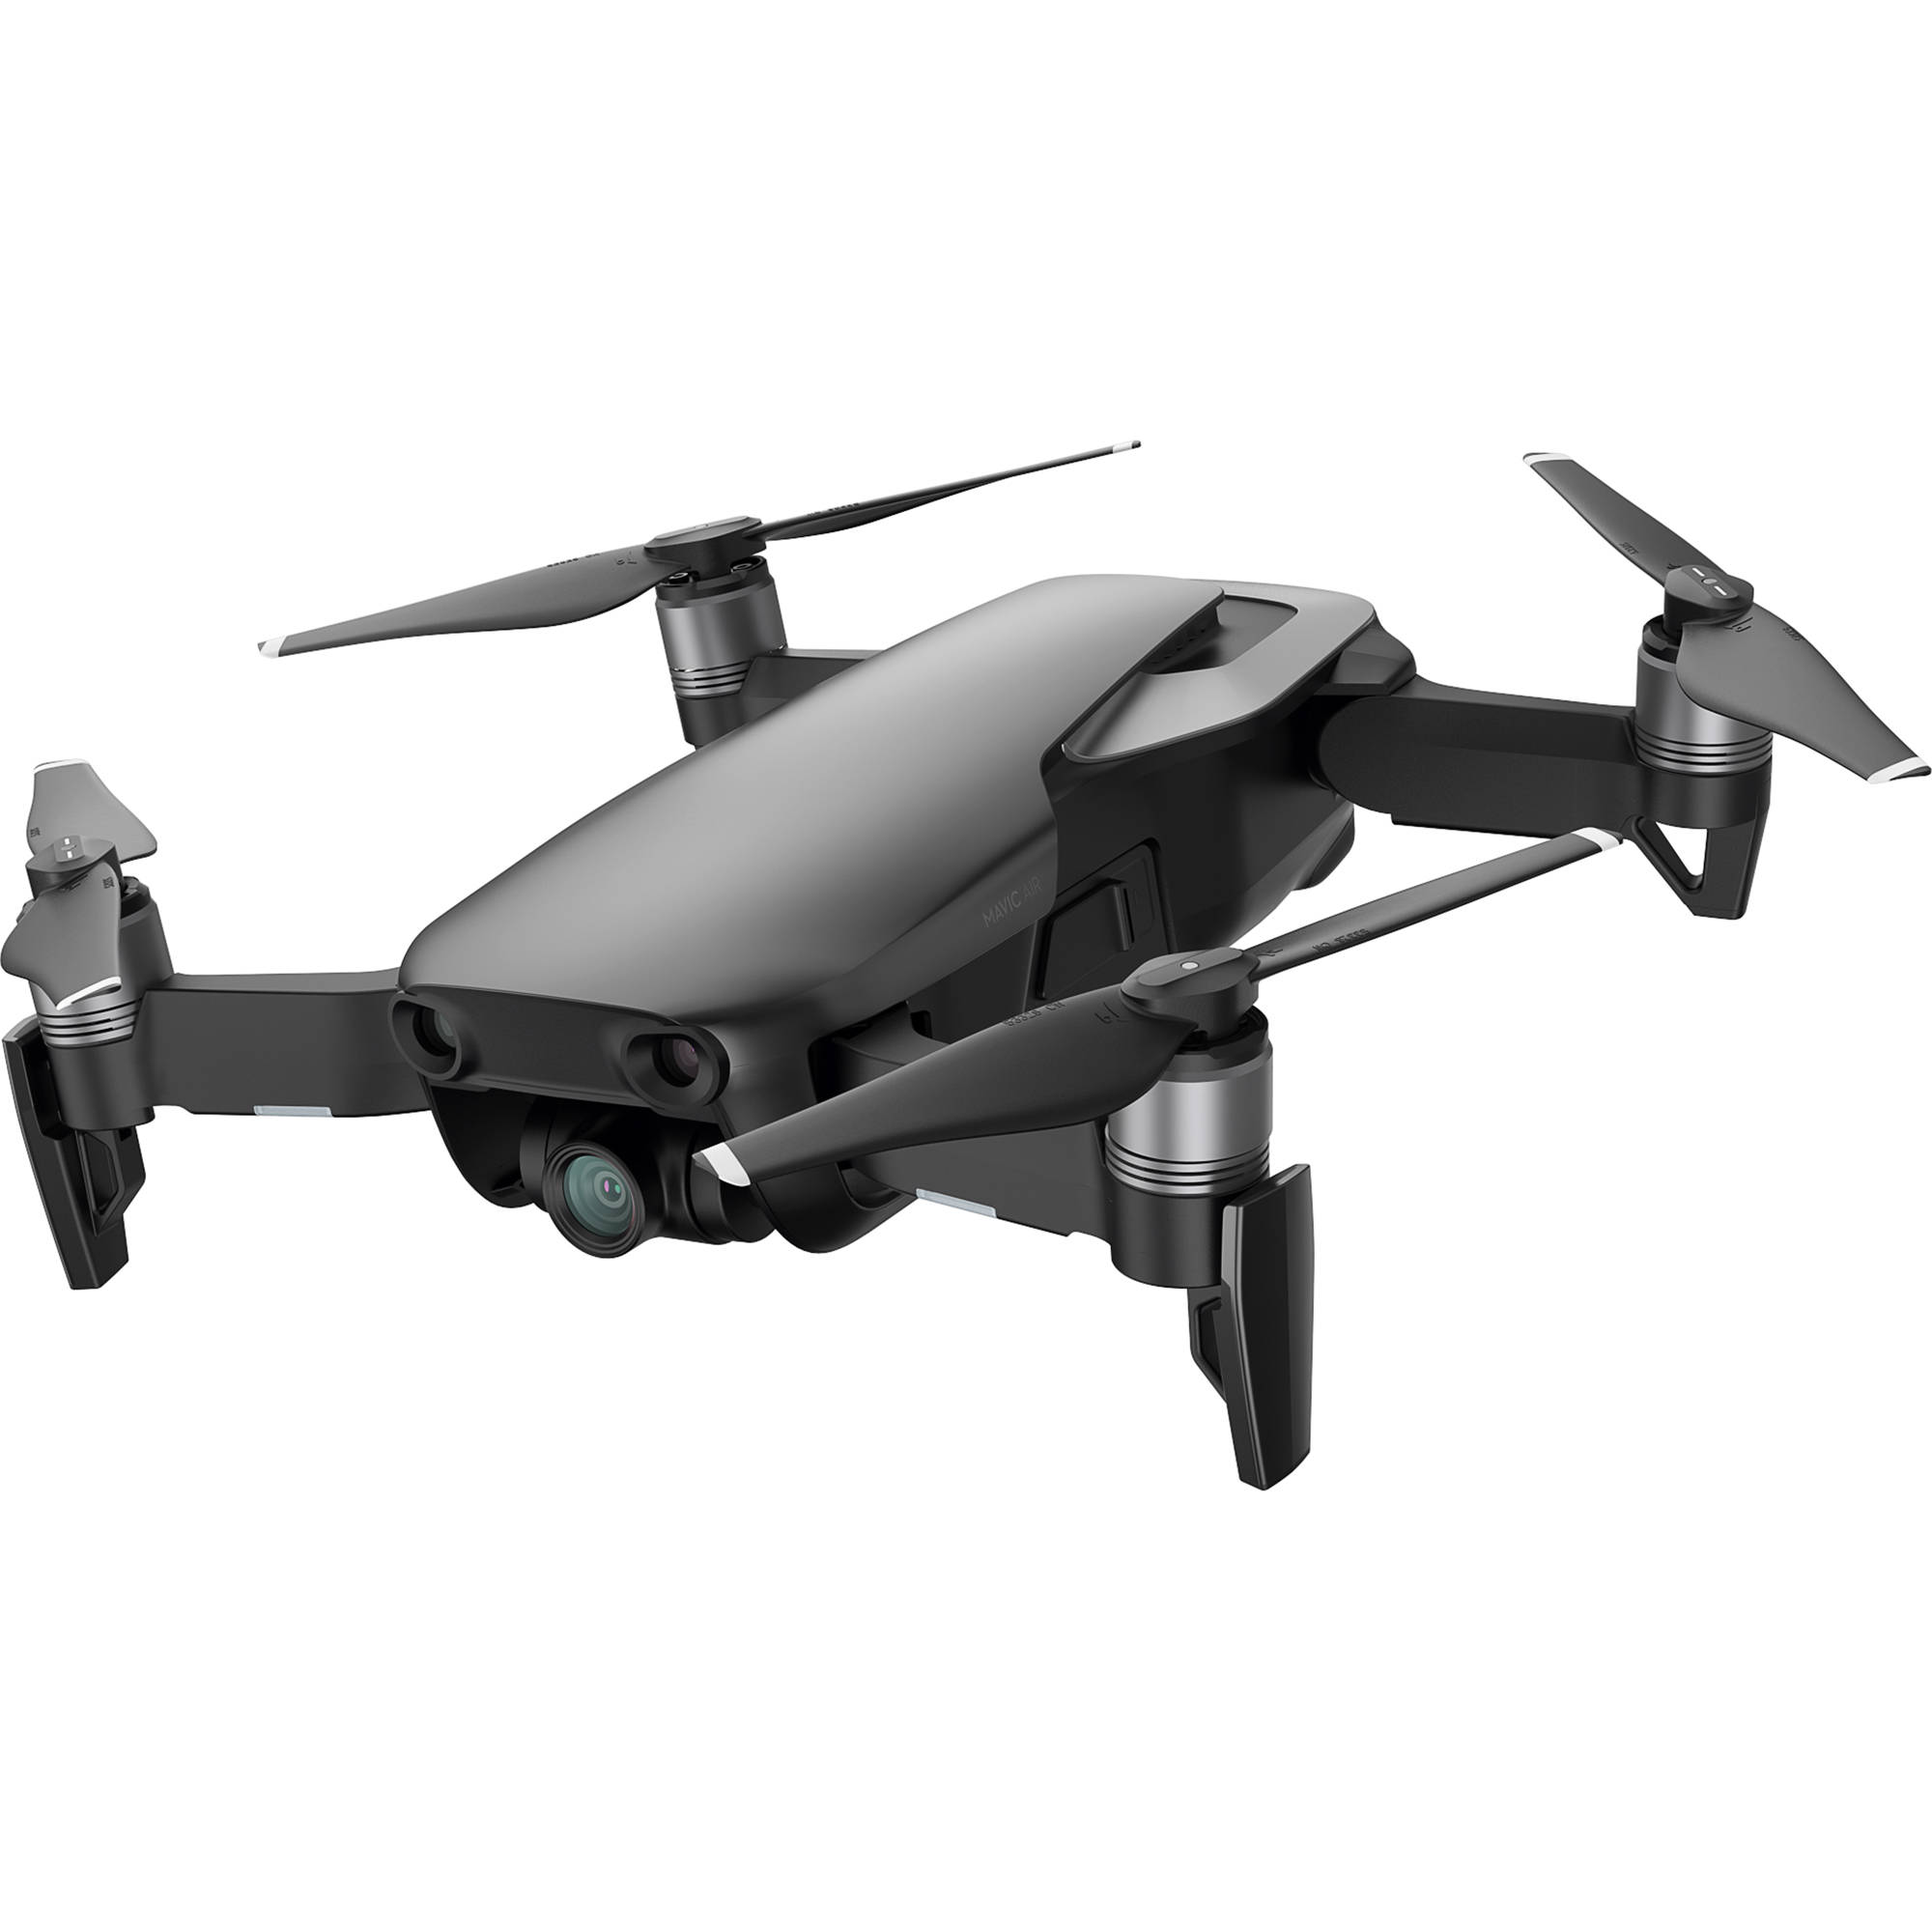 DJI Mavic Air review: Aerial photography's next small thing - GearOpen.com